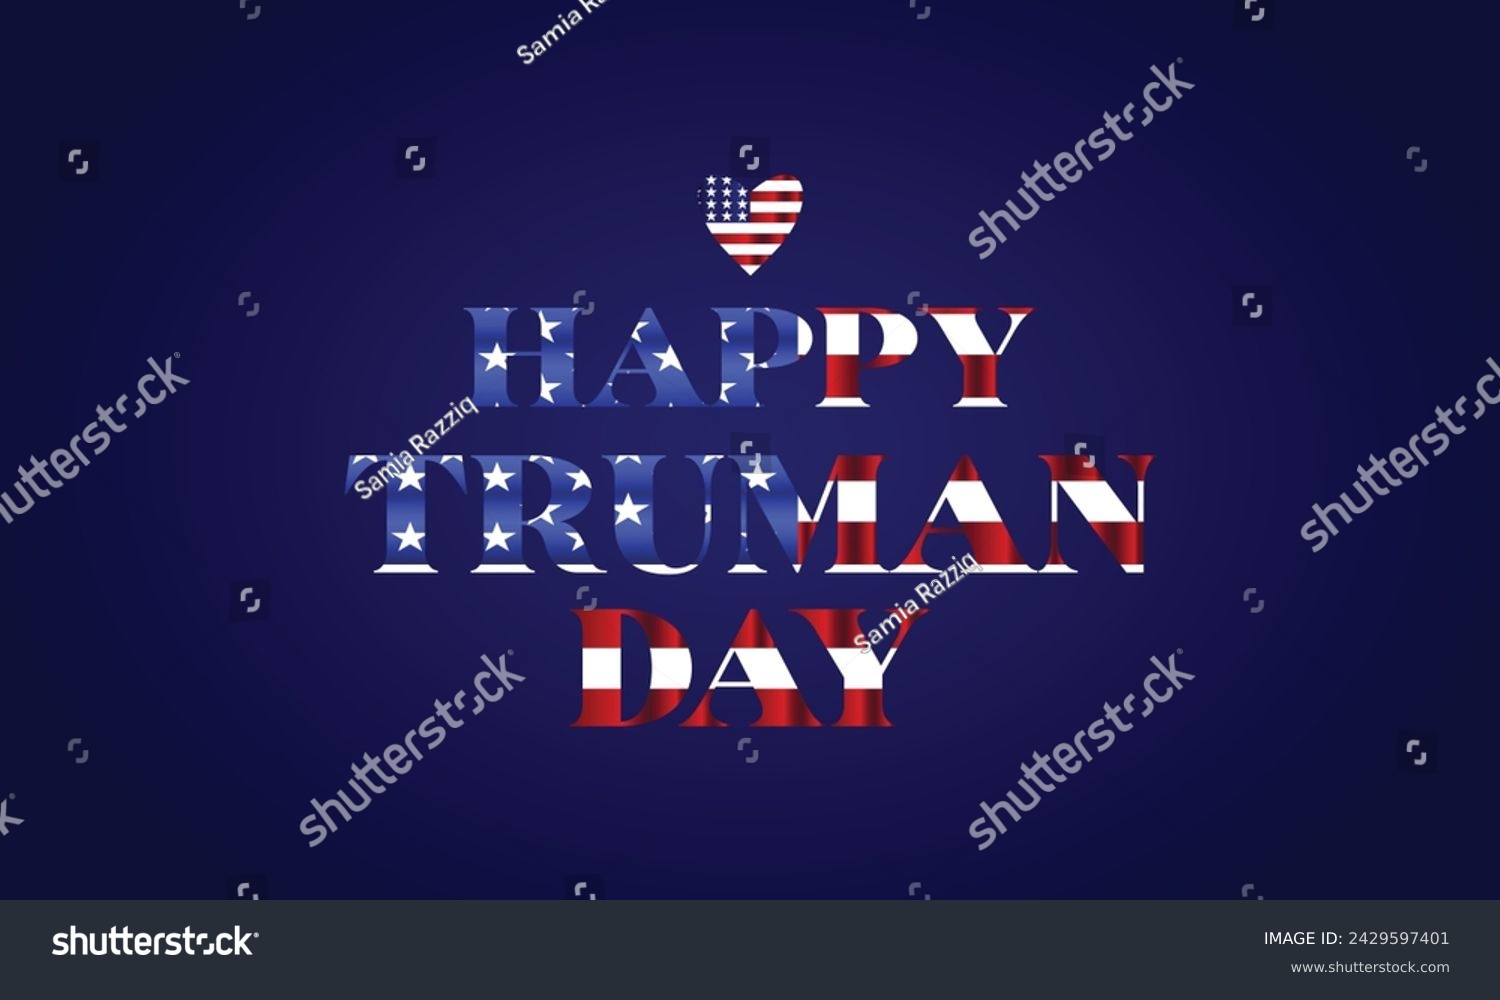 SVG of Happy Truman Day Stylish Text With Usa Flag Design svg